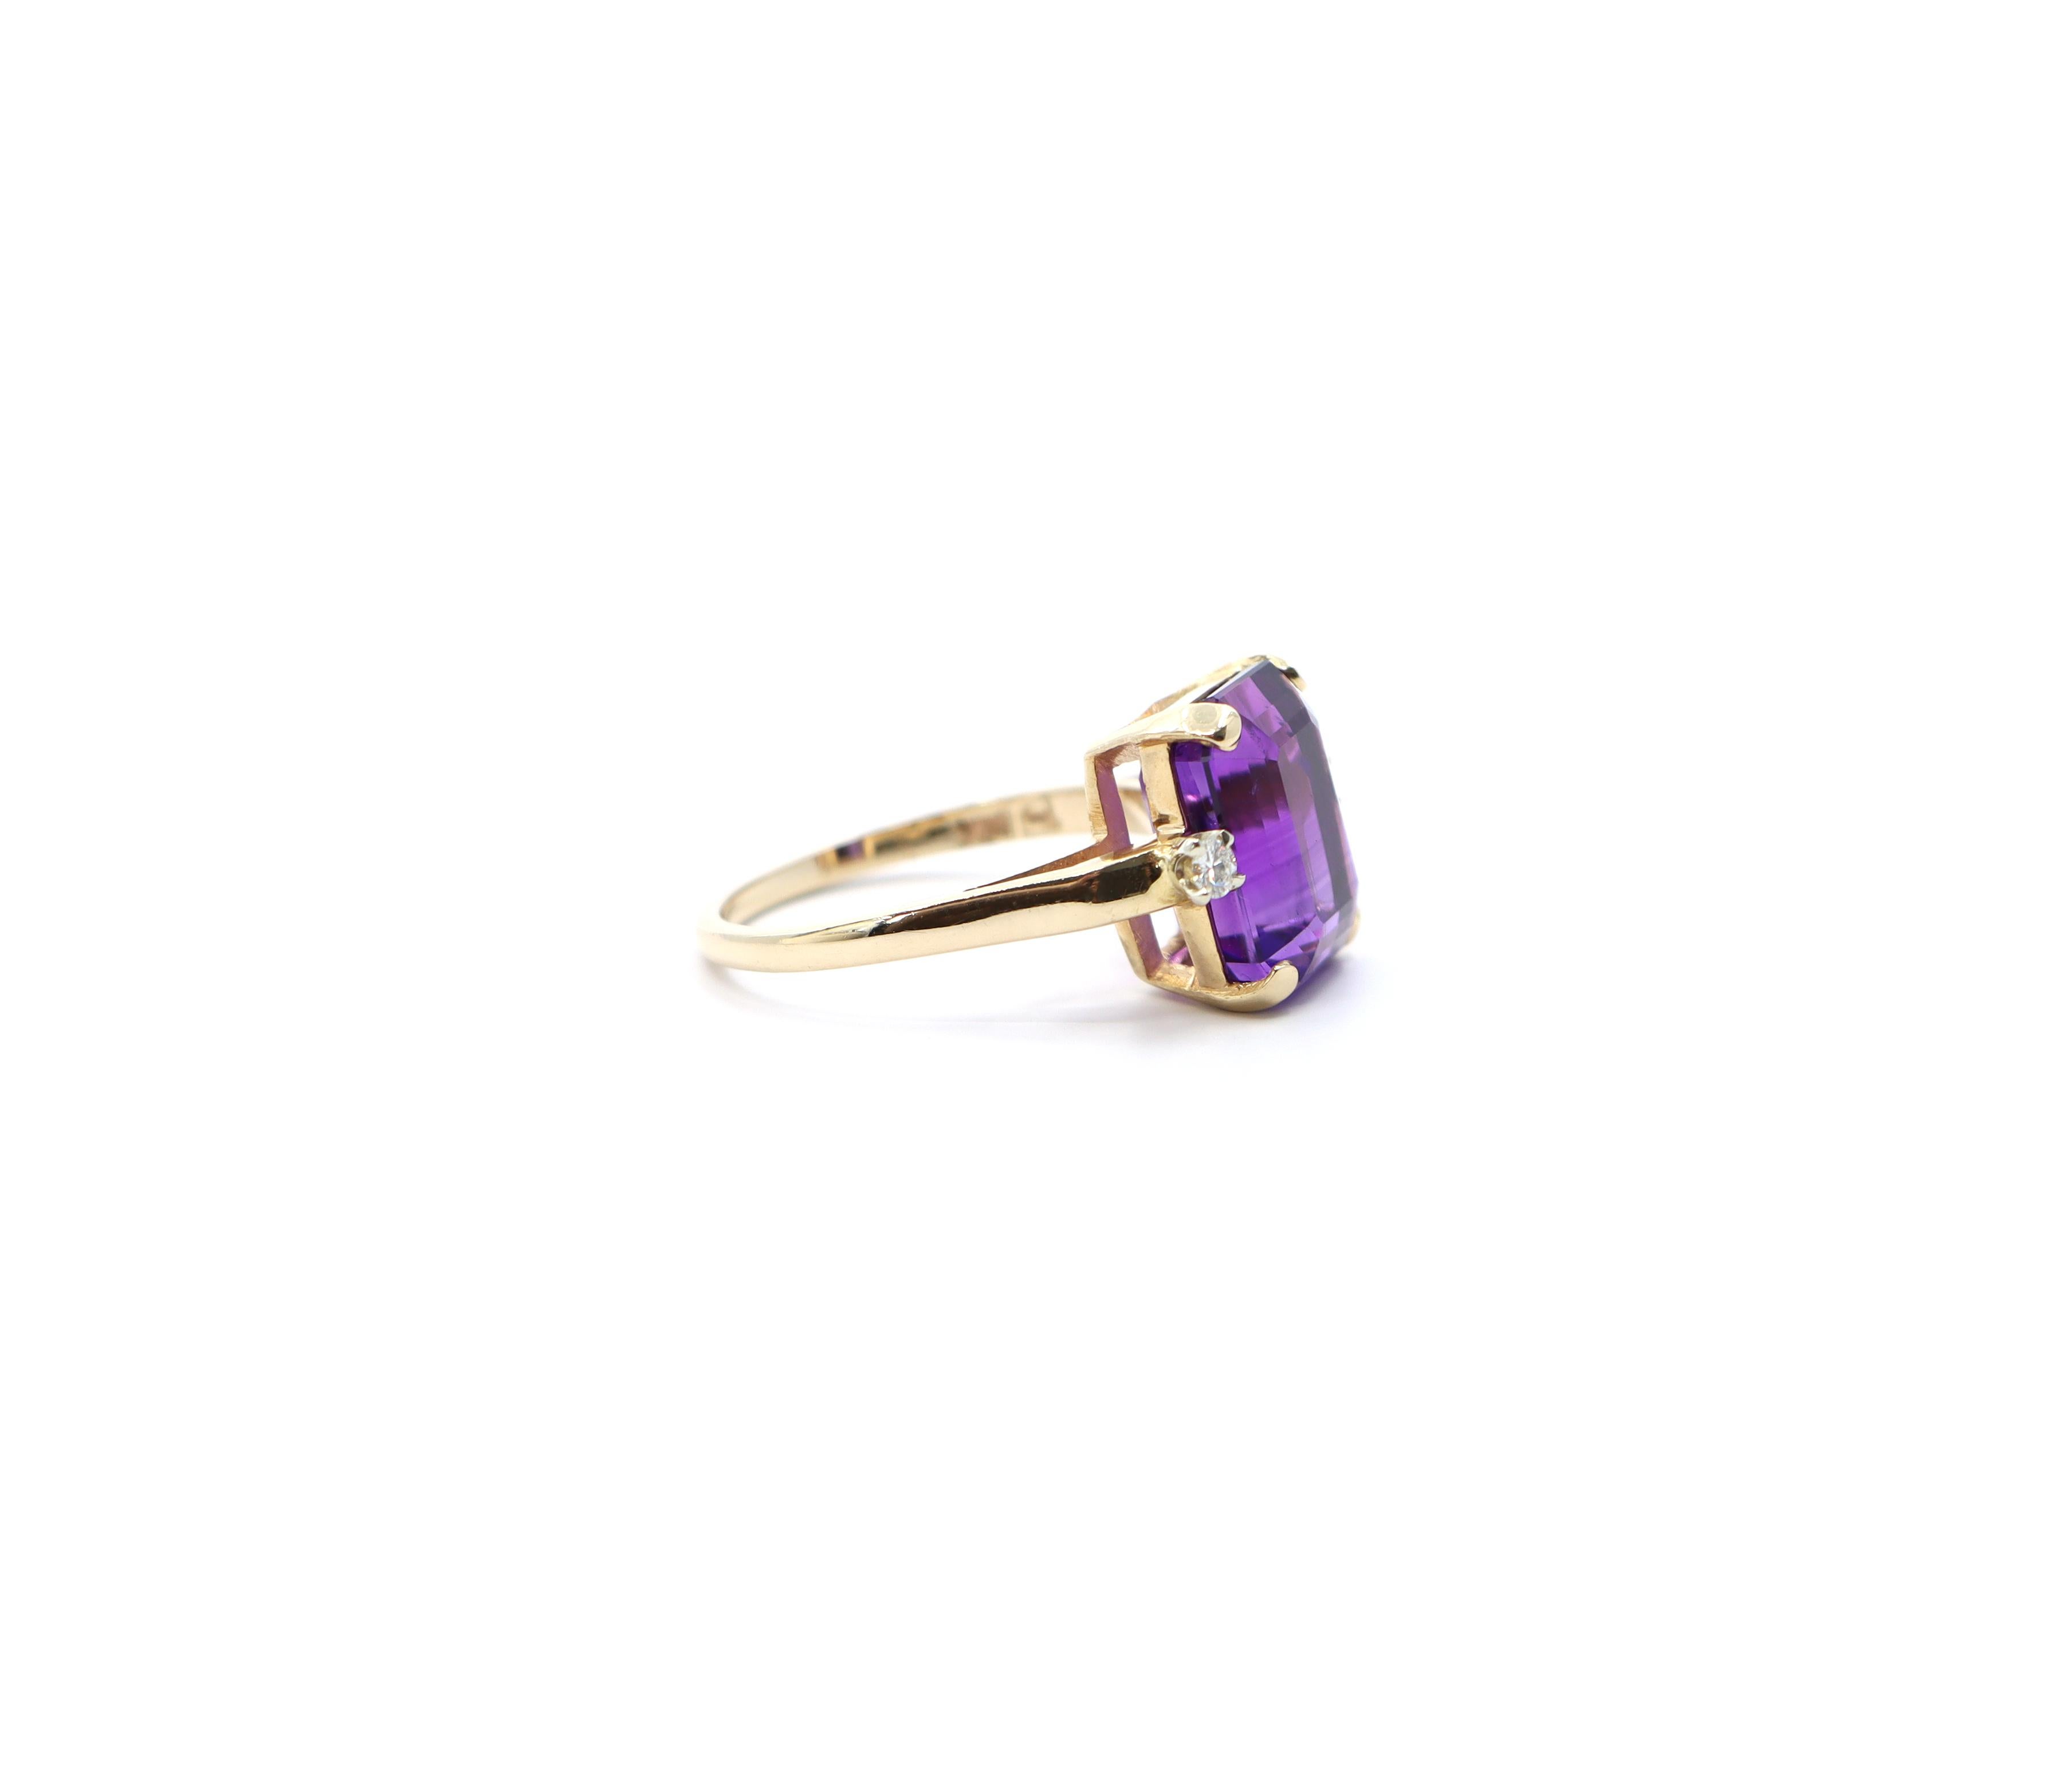 Introducing a captivating piece of fine jewelry, this exquisite 14K Amethyst and Diamond Three Stone Ring radiates elegance and allure. Meticulously crafted in 14K gold, this ring showcases a harmonious blend of luxurious materials and exceptional